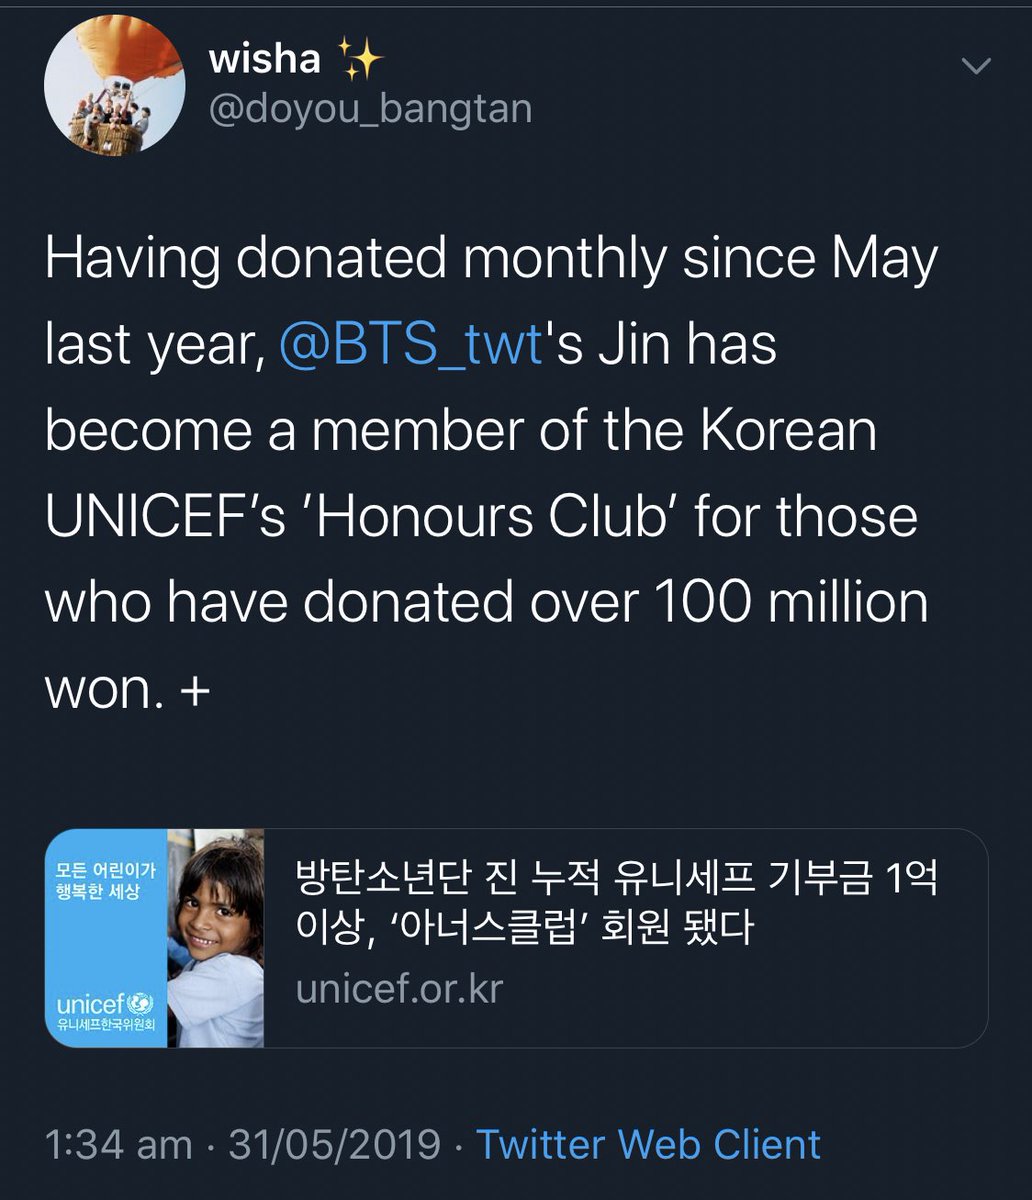 Jin’s love for animals goes far beyond this songDespite his many acts of philanthropy & quiet donations to UNICEF on a monthly basis, Jin also donated huge amounts of dog food to shelters in need. The following year his fans (ARMYs) celebrated his birthday with the same gesture